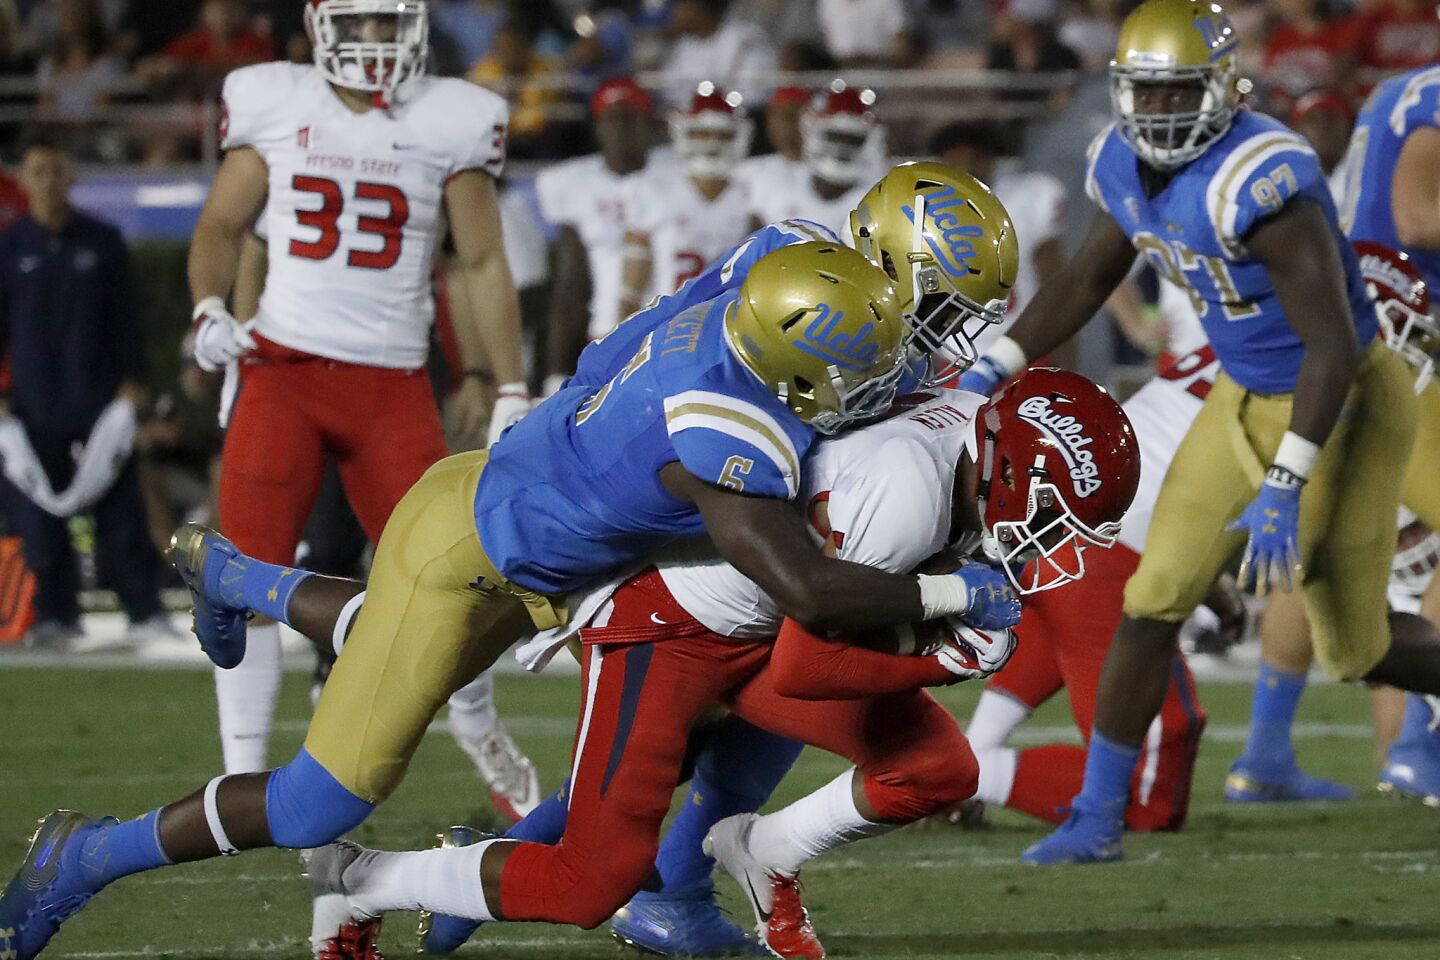 UCLA defenders Adarius Pickett (6) and Krys Barnes bring down Fresno State wide receiver Justin Allen in the second quarter on Saturday at the Rose Bowl.